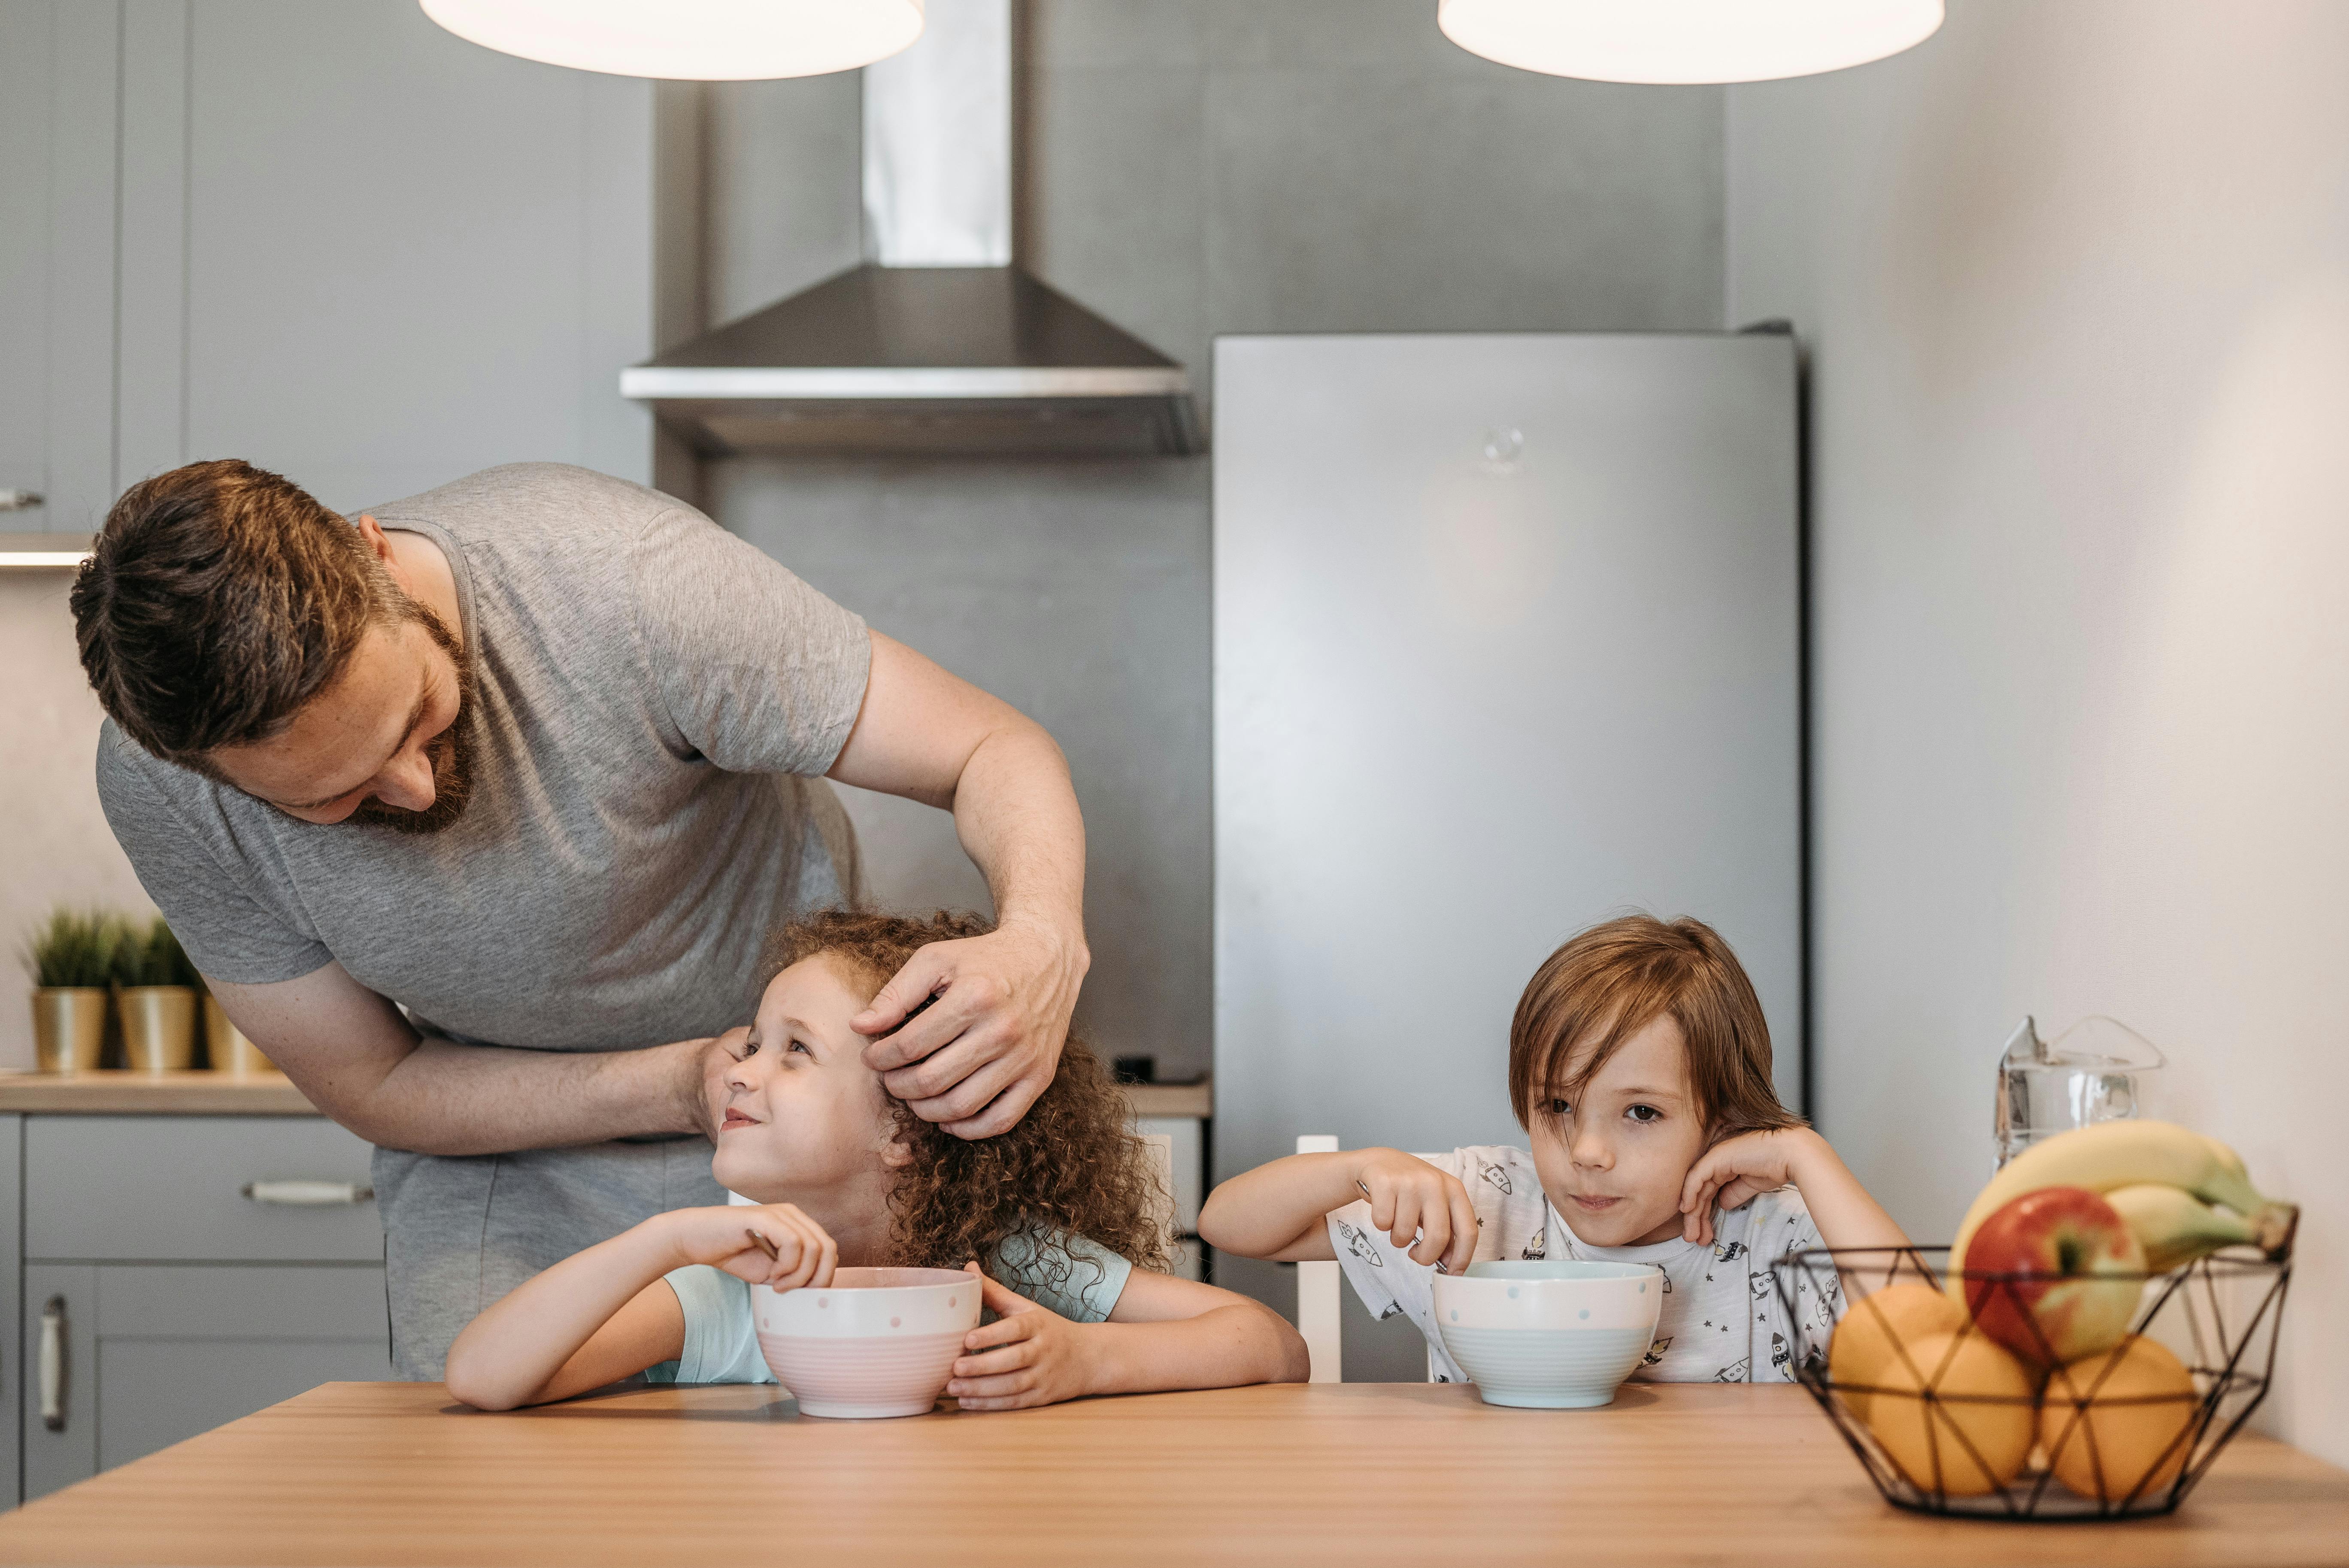 A single dad with his two children | Source: Pexels